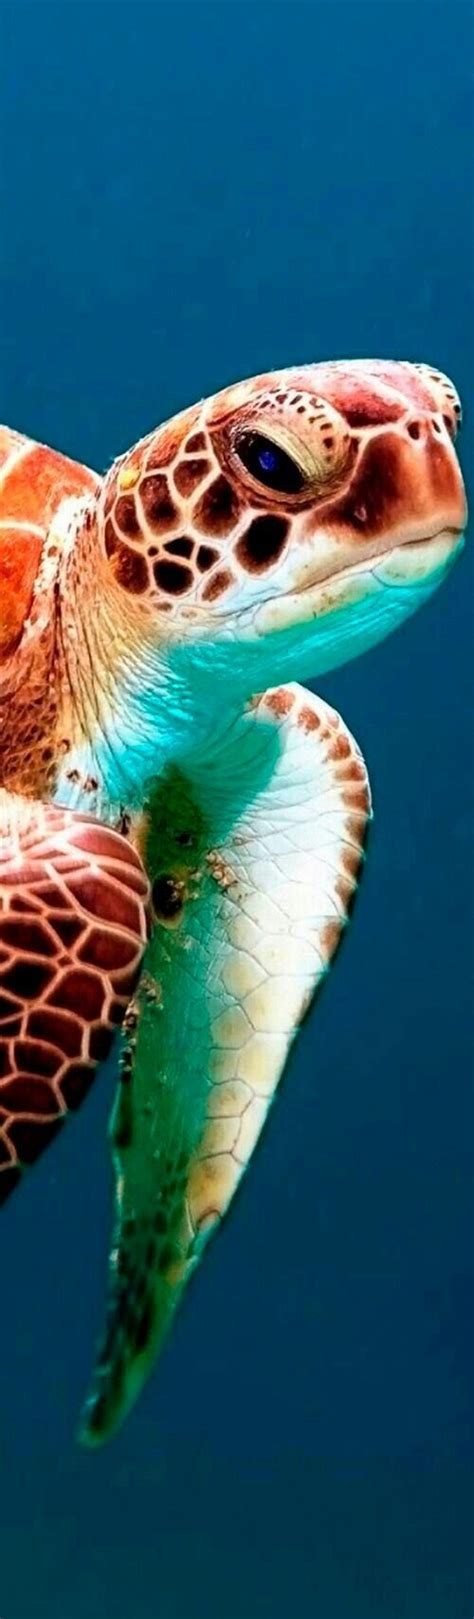 A Sea Turtle Swimming In The Ocean